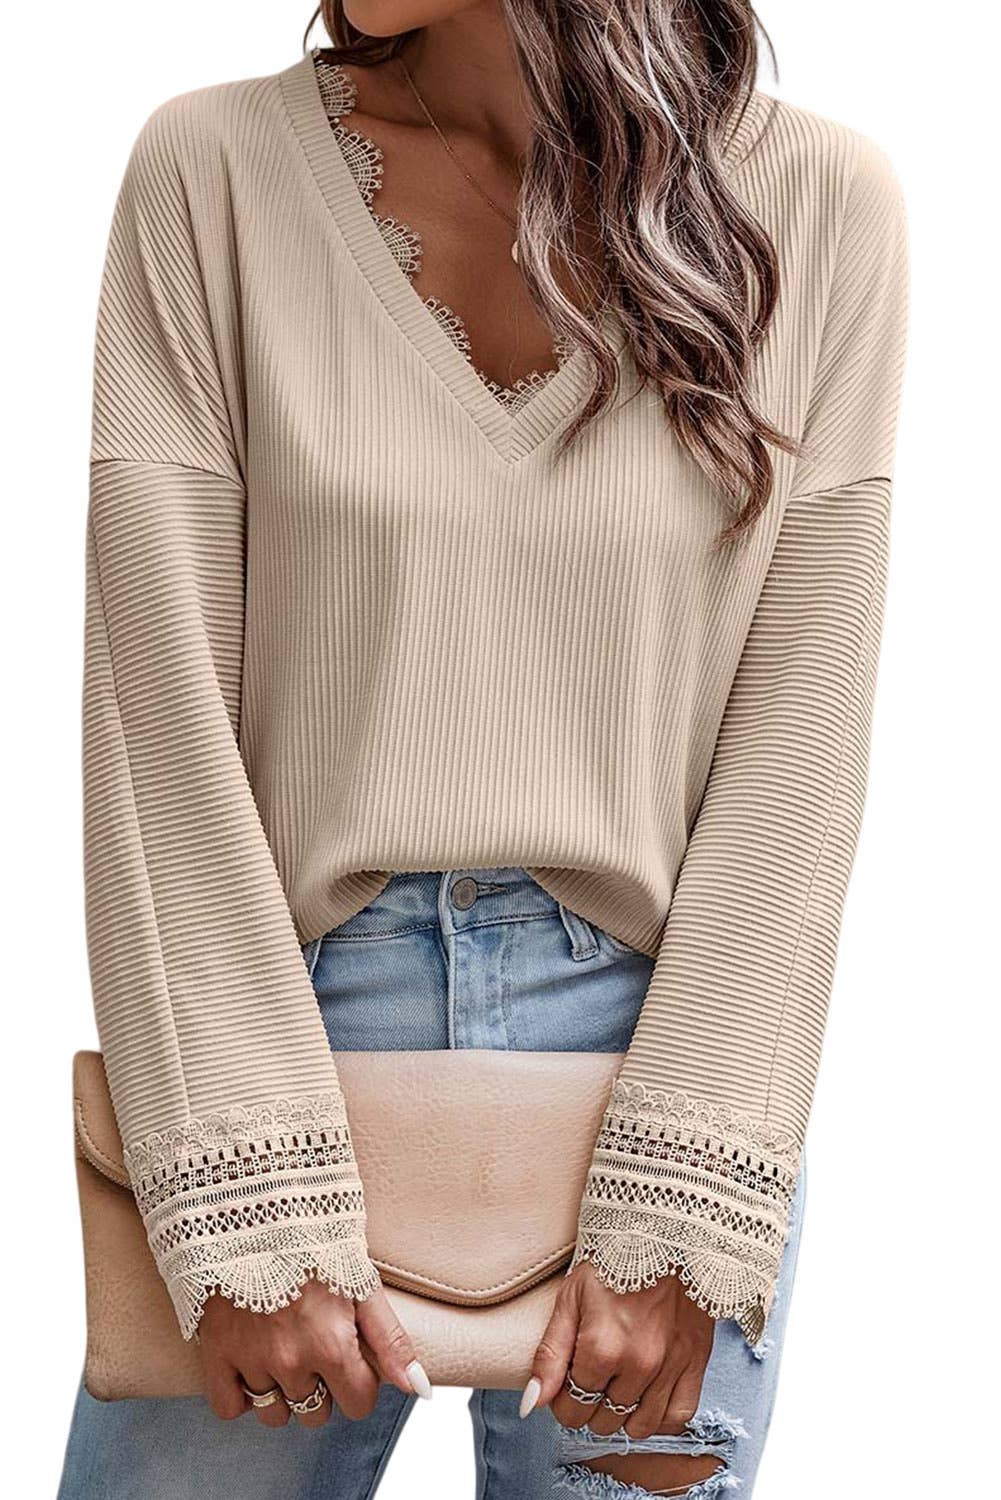 Ribbed Texture Lace Trim V Neck Long Sleeve Top: L / MULTI